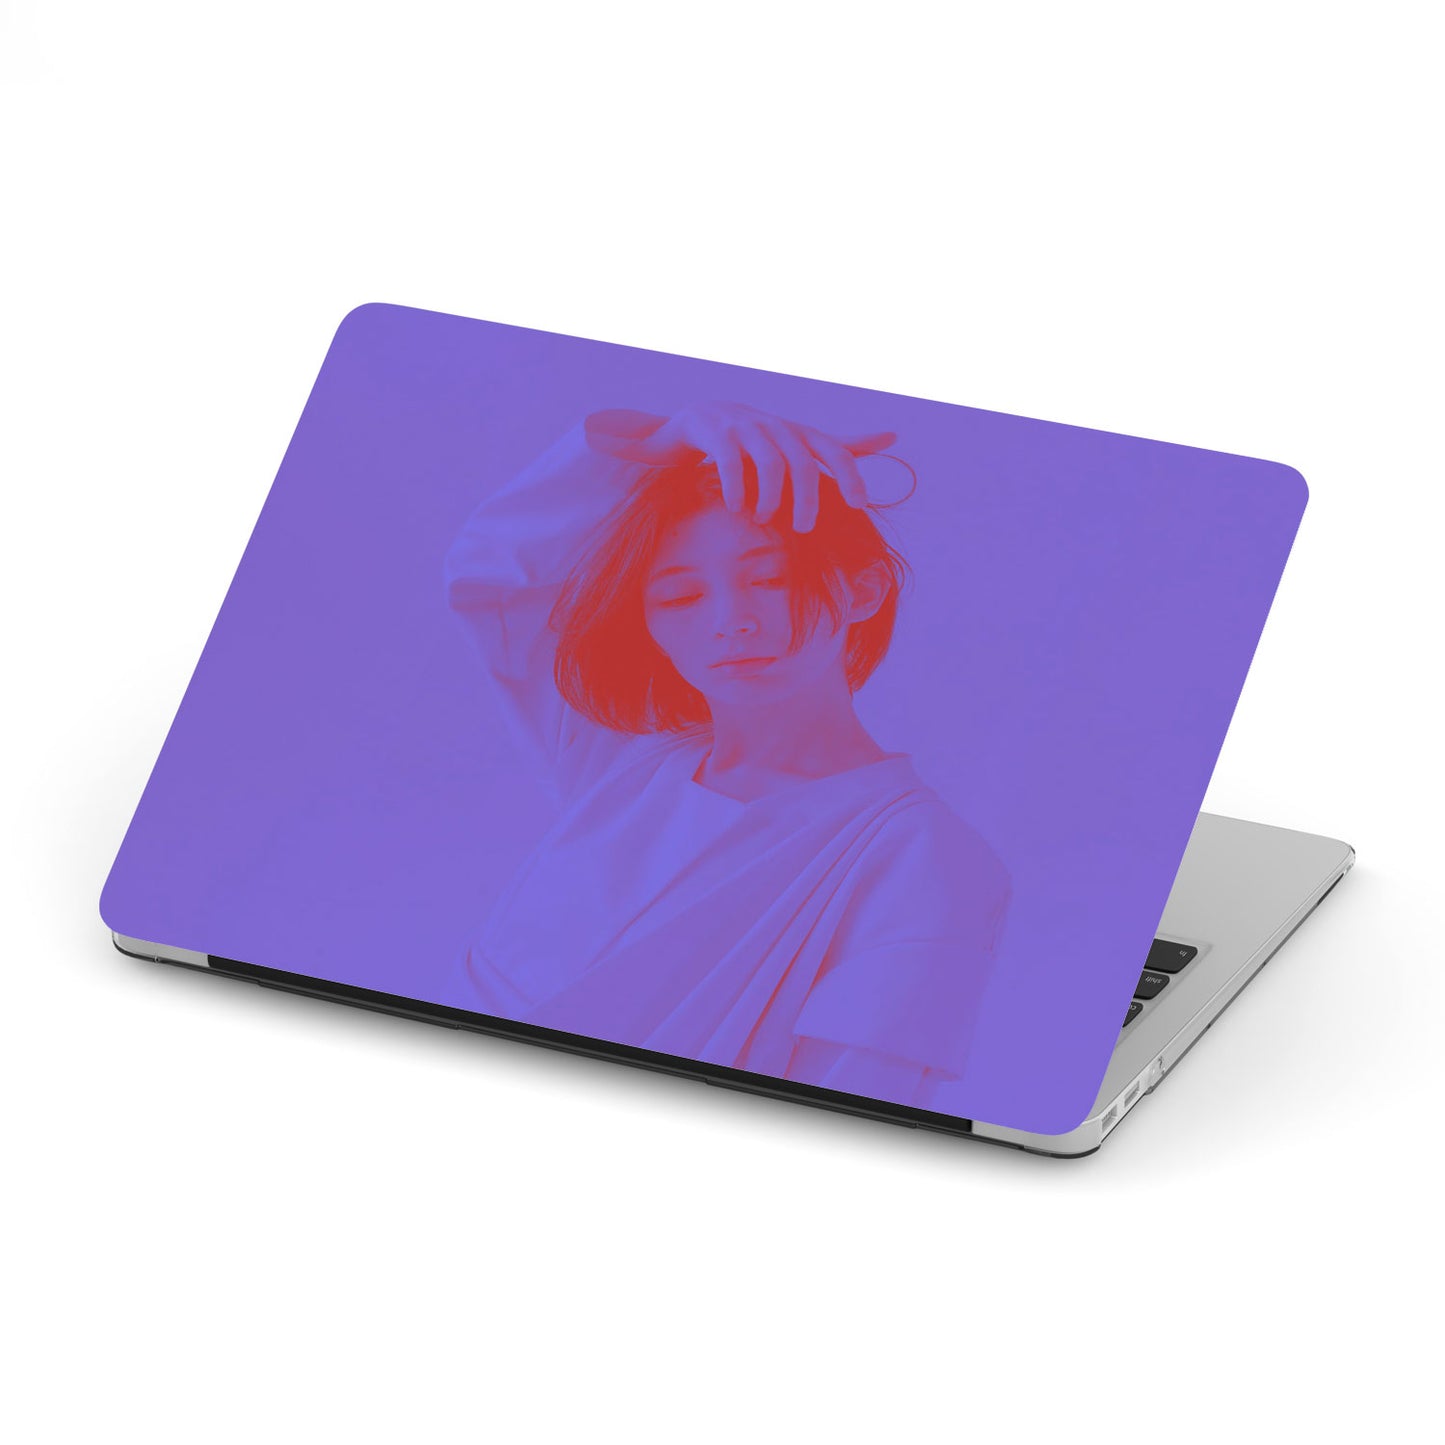 Custom Duotone Macbook Case with One Photo - Design Your Own